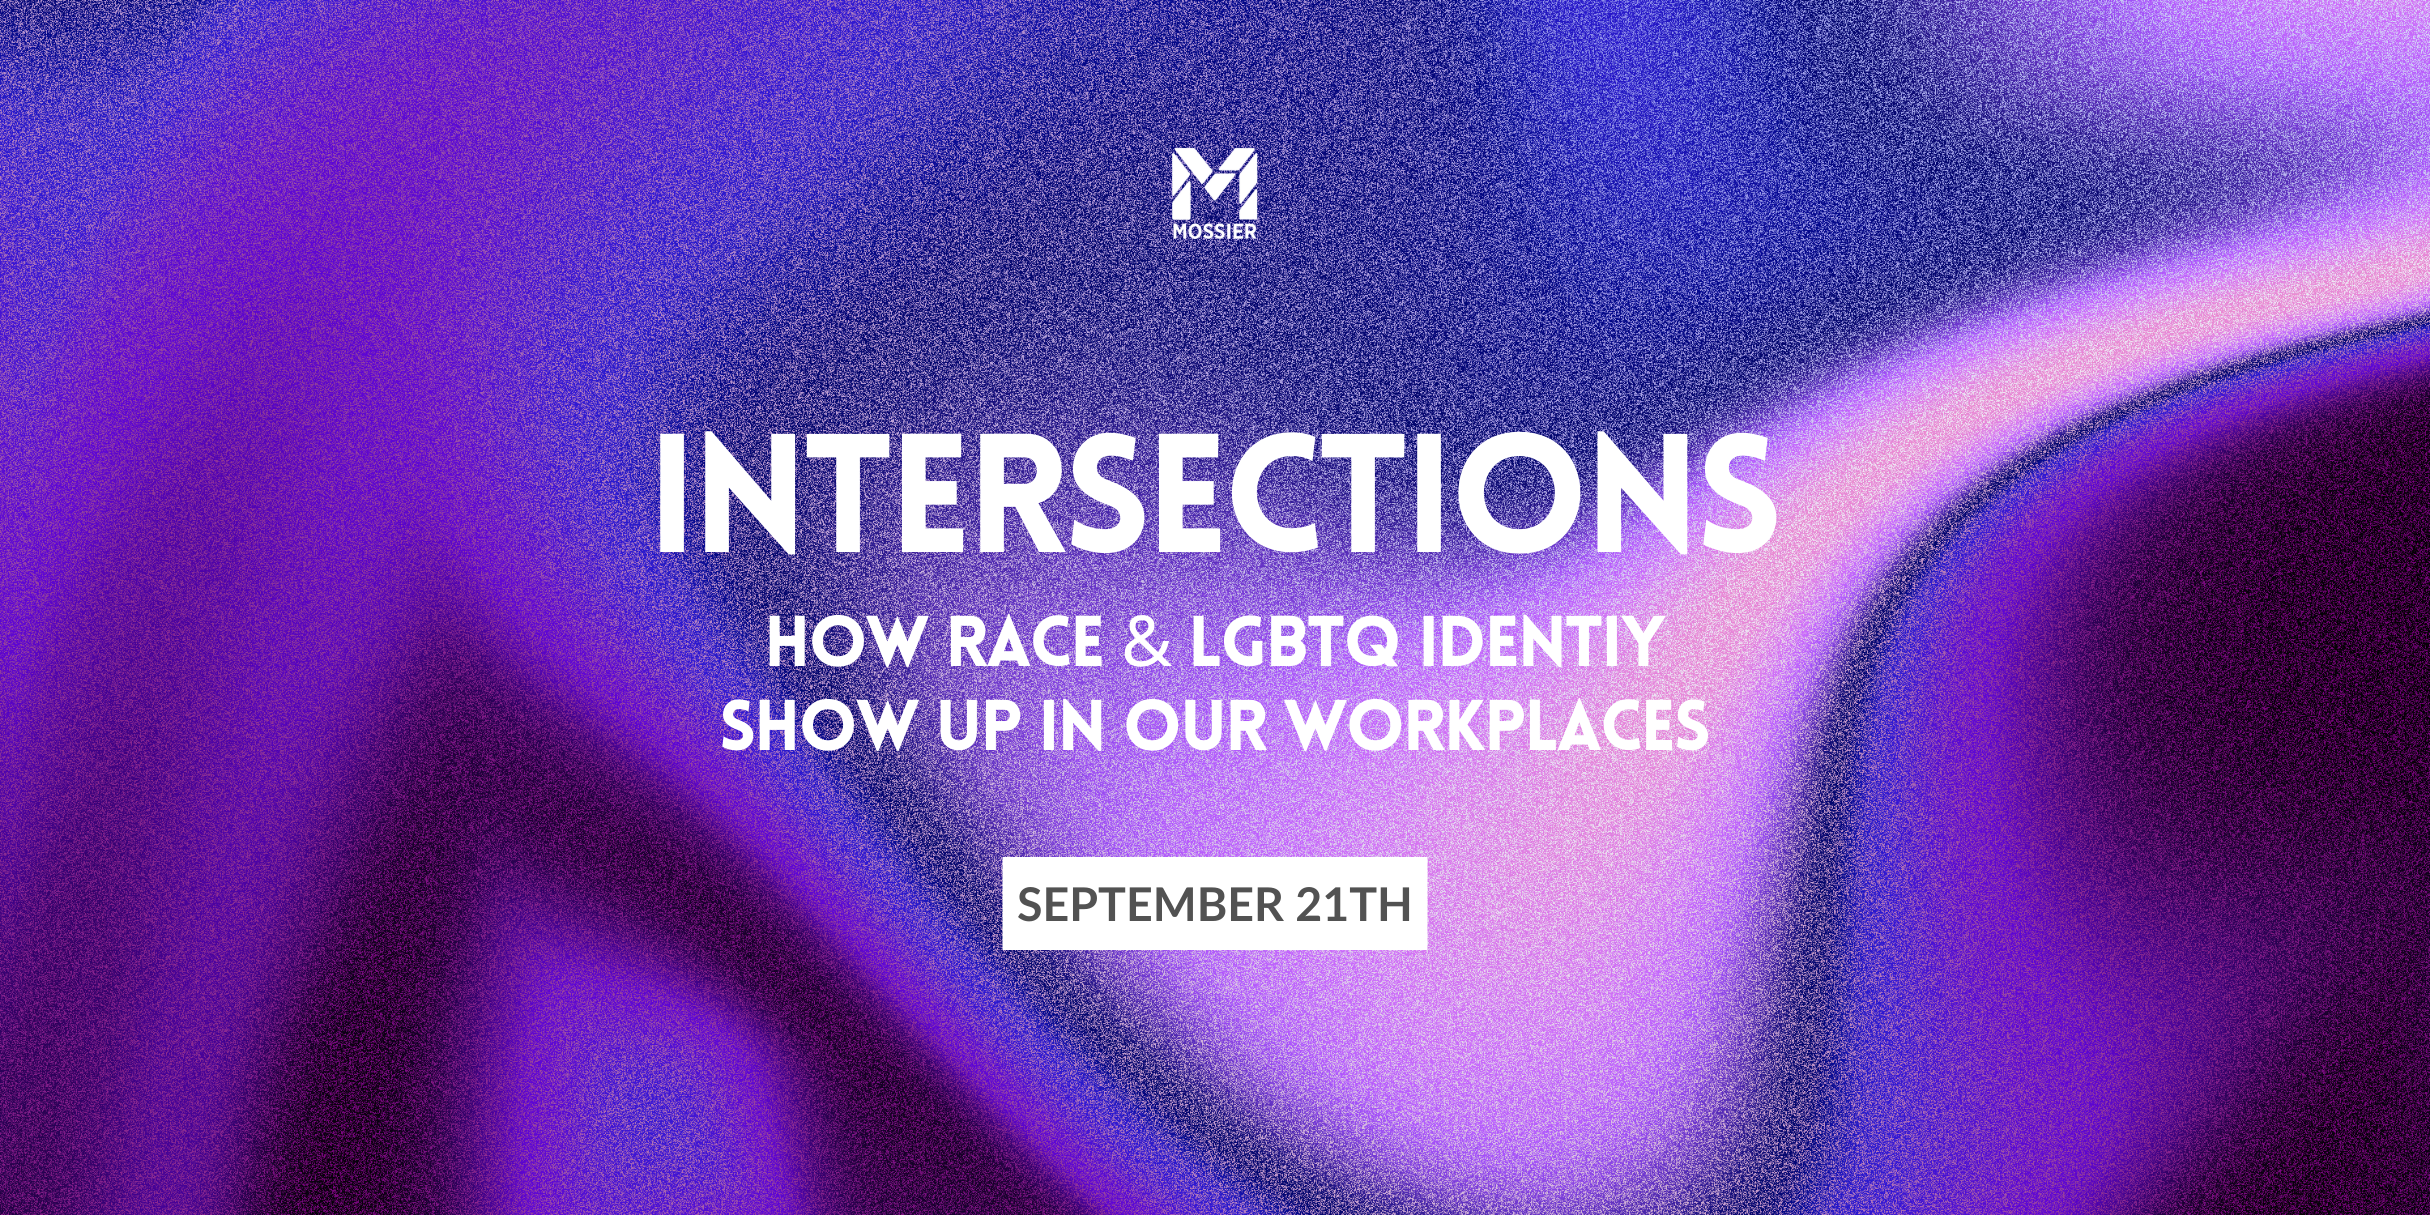 Intersections: How Race & LGBTQ Identity Show up in Our Workplaces